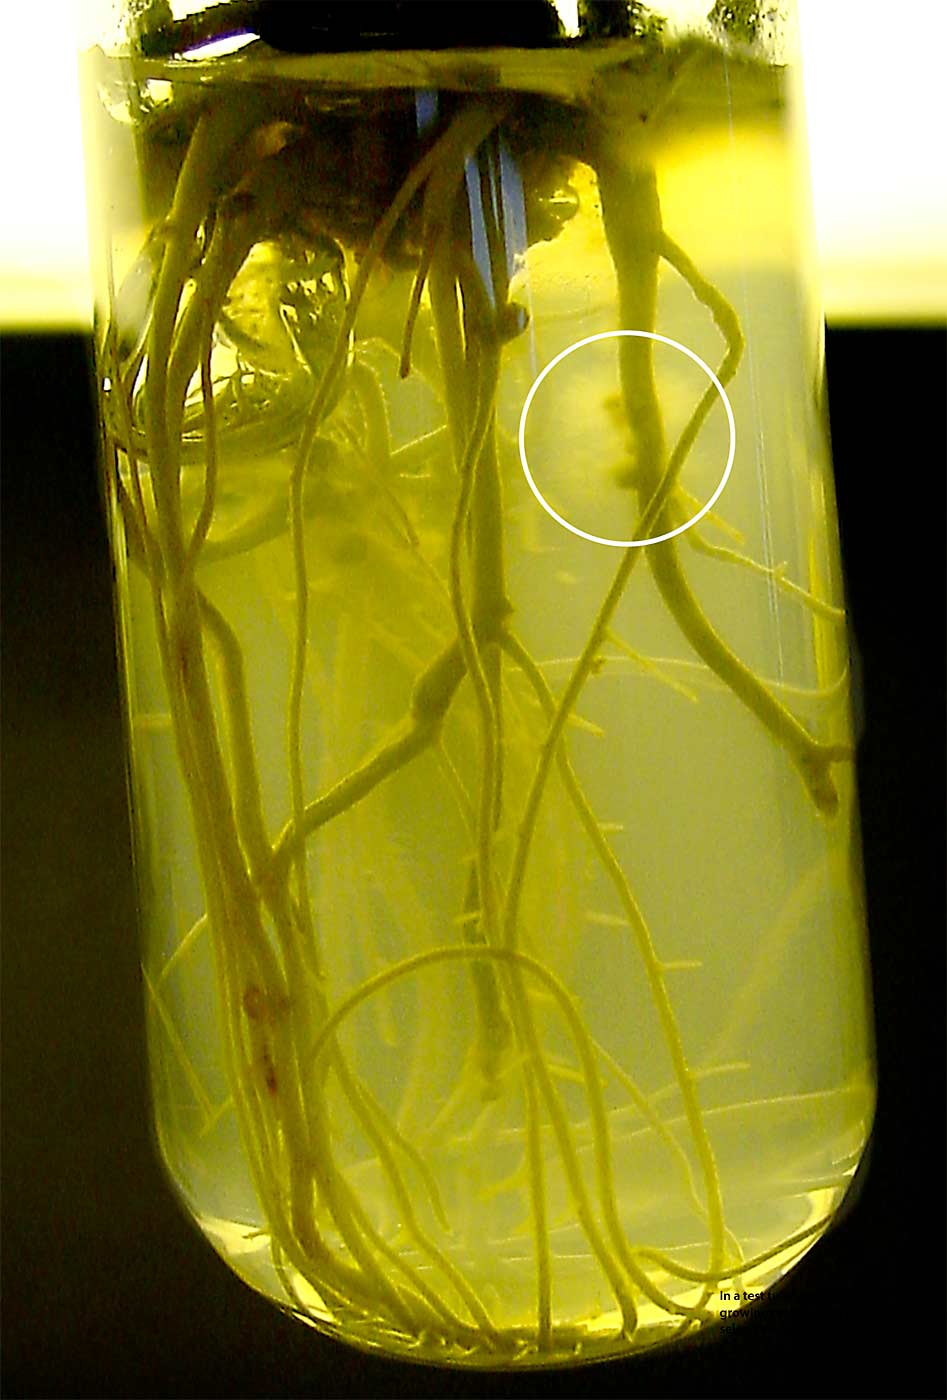 In a test tube, an unidentified Prunus selection grows in an agar medium inoculated with the root pathogen Armillaria mellea, which appears as a white fuzz growing on the roots (circled). U.S. Department of Agriculture pathologist Kendra Baumgartner developed this technique as a faster method of screening selections for disease resistance. (Courtesy Kendra Baumgartner/U.S. Department of Agriculture)